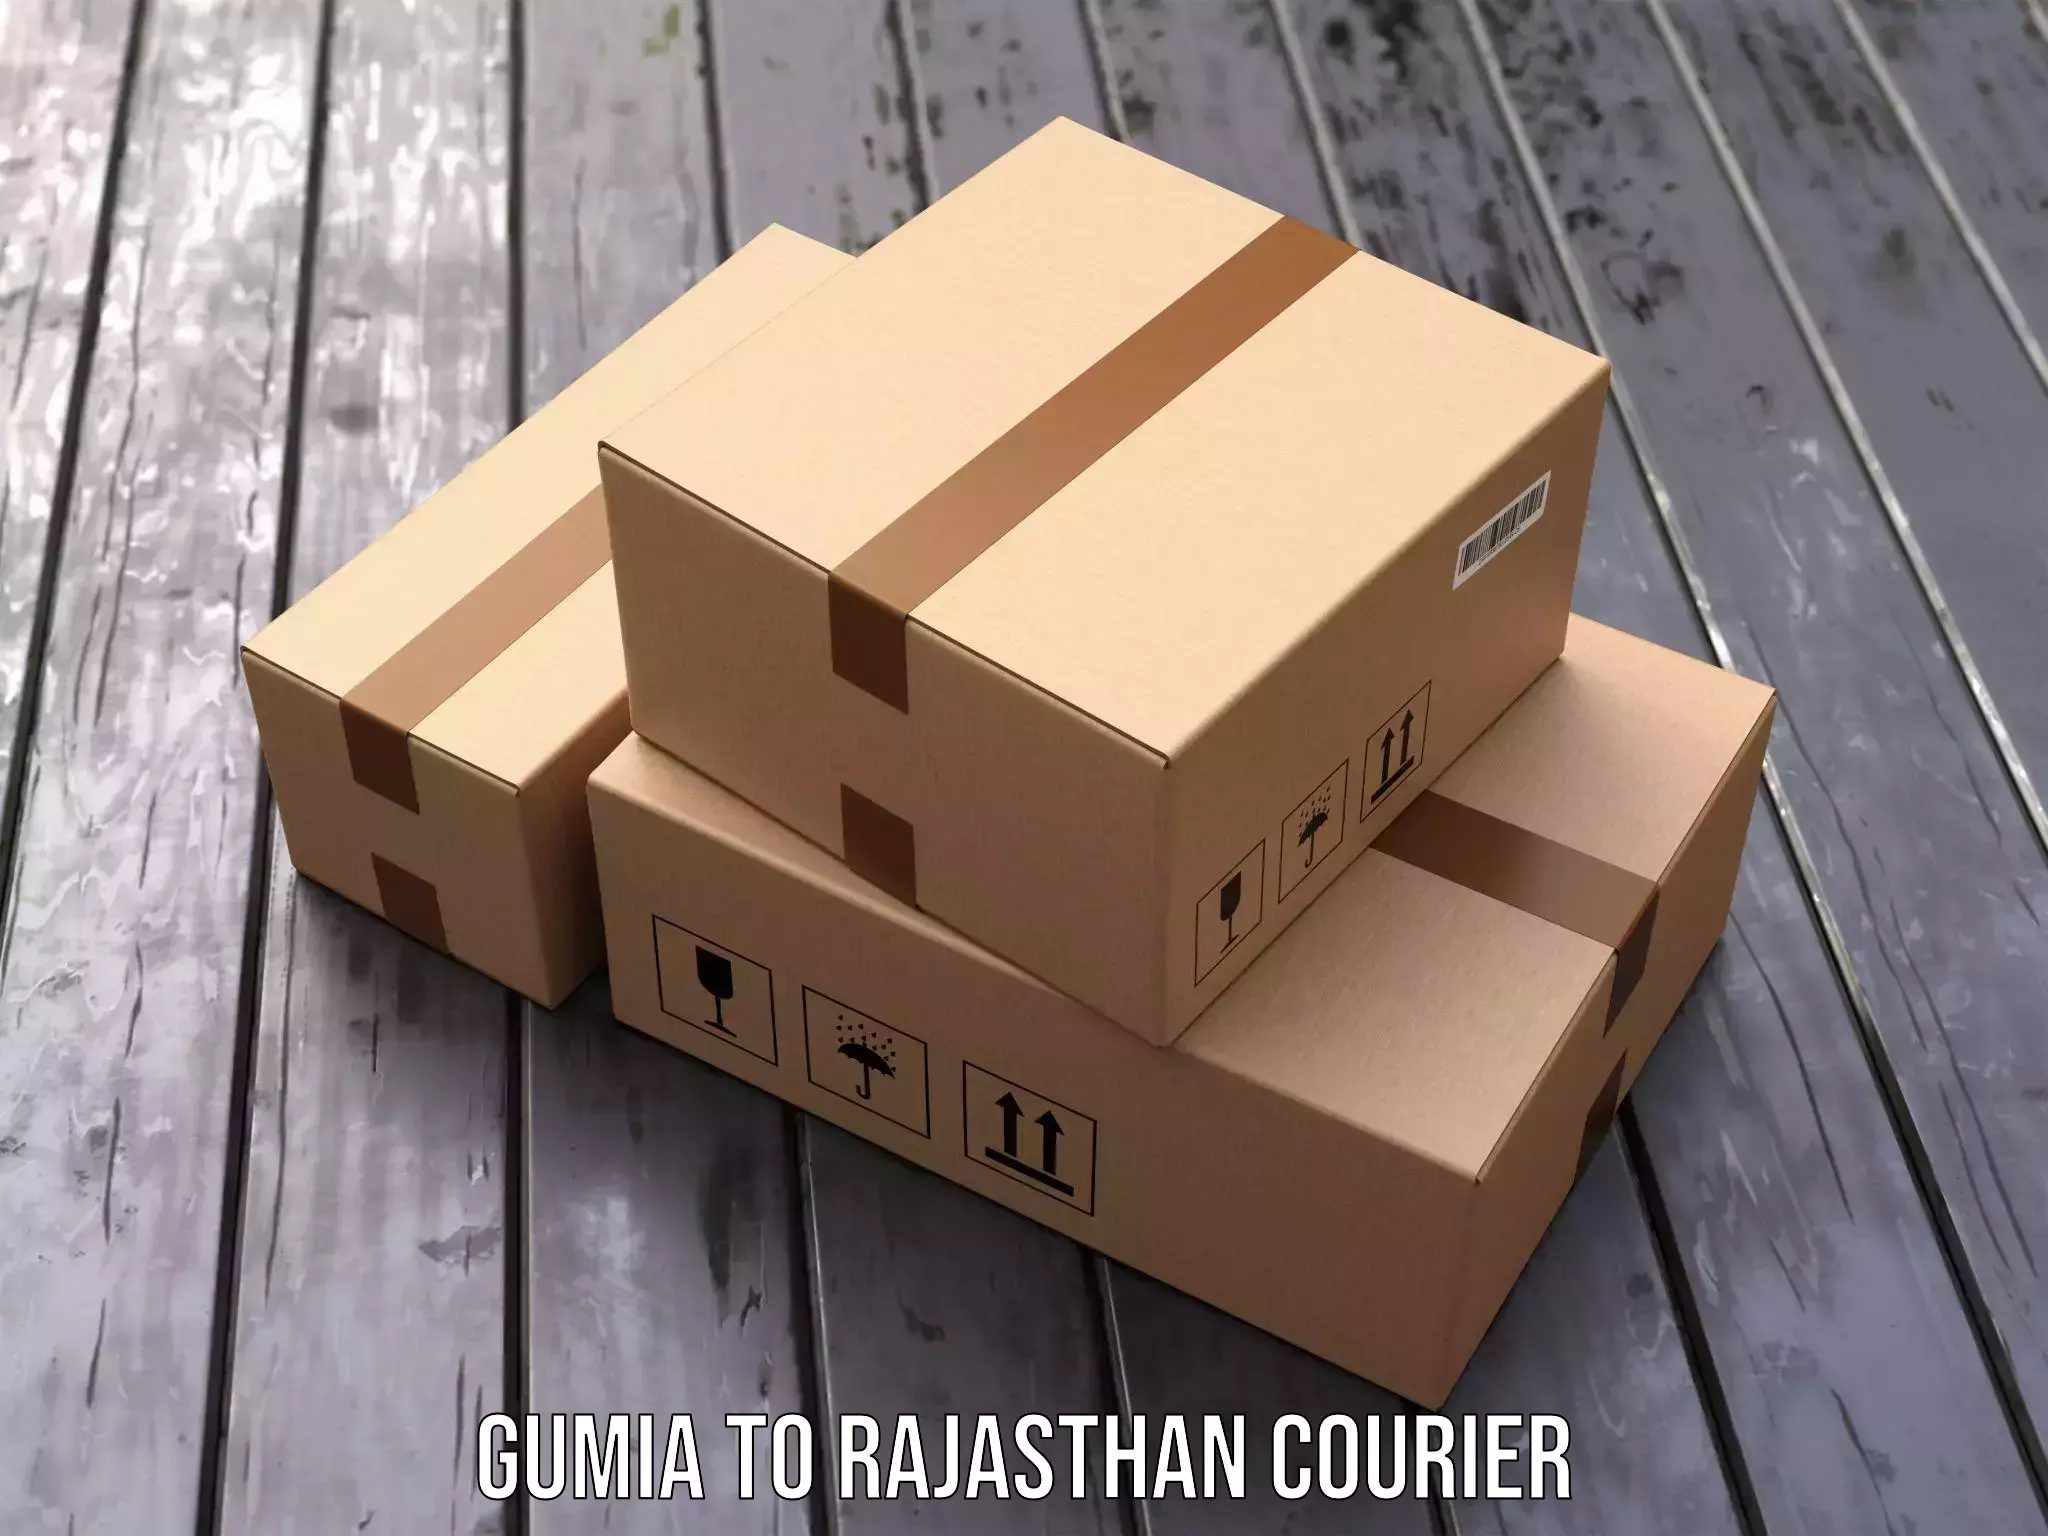 Efficient order fulfillment in Gumia to Gharsana